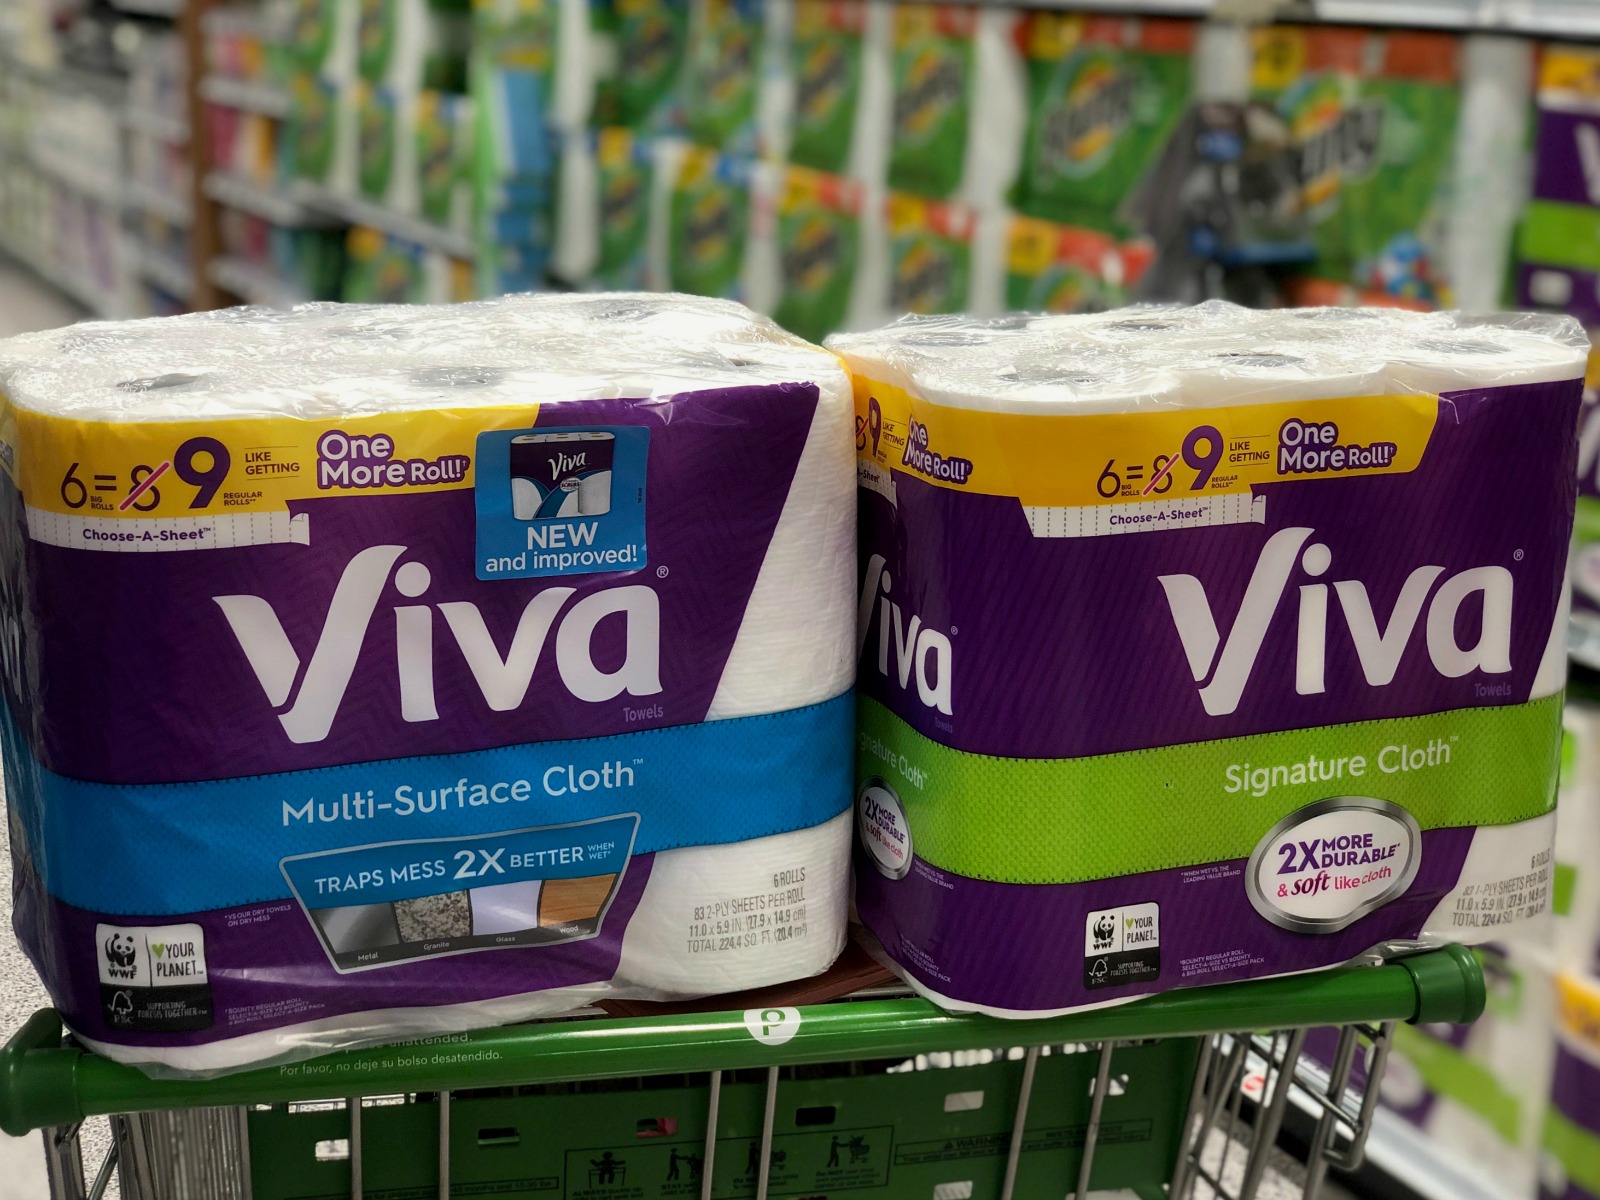 Great Deal On Viva Paper Towels After Coupon & Sale At Publix on I Heart Publix